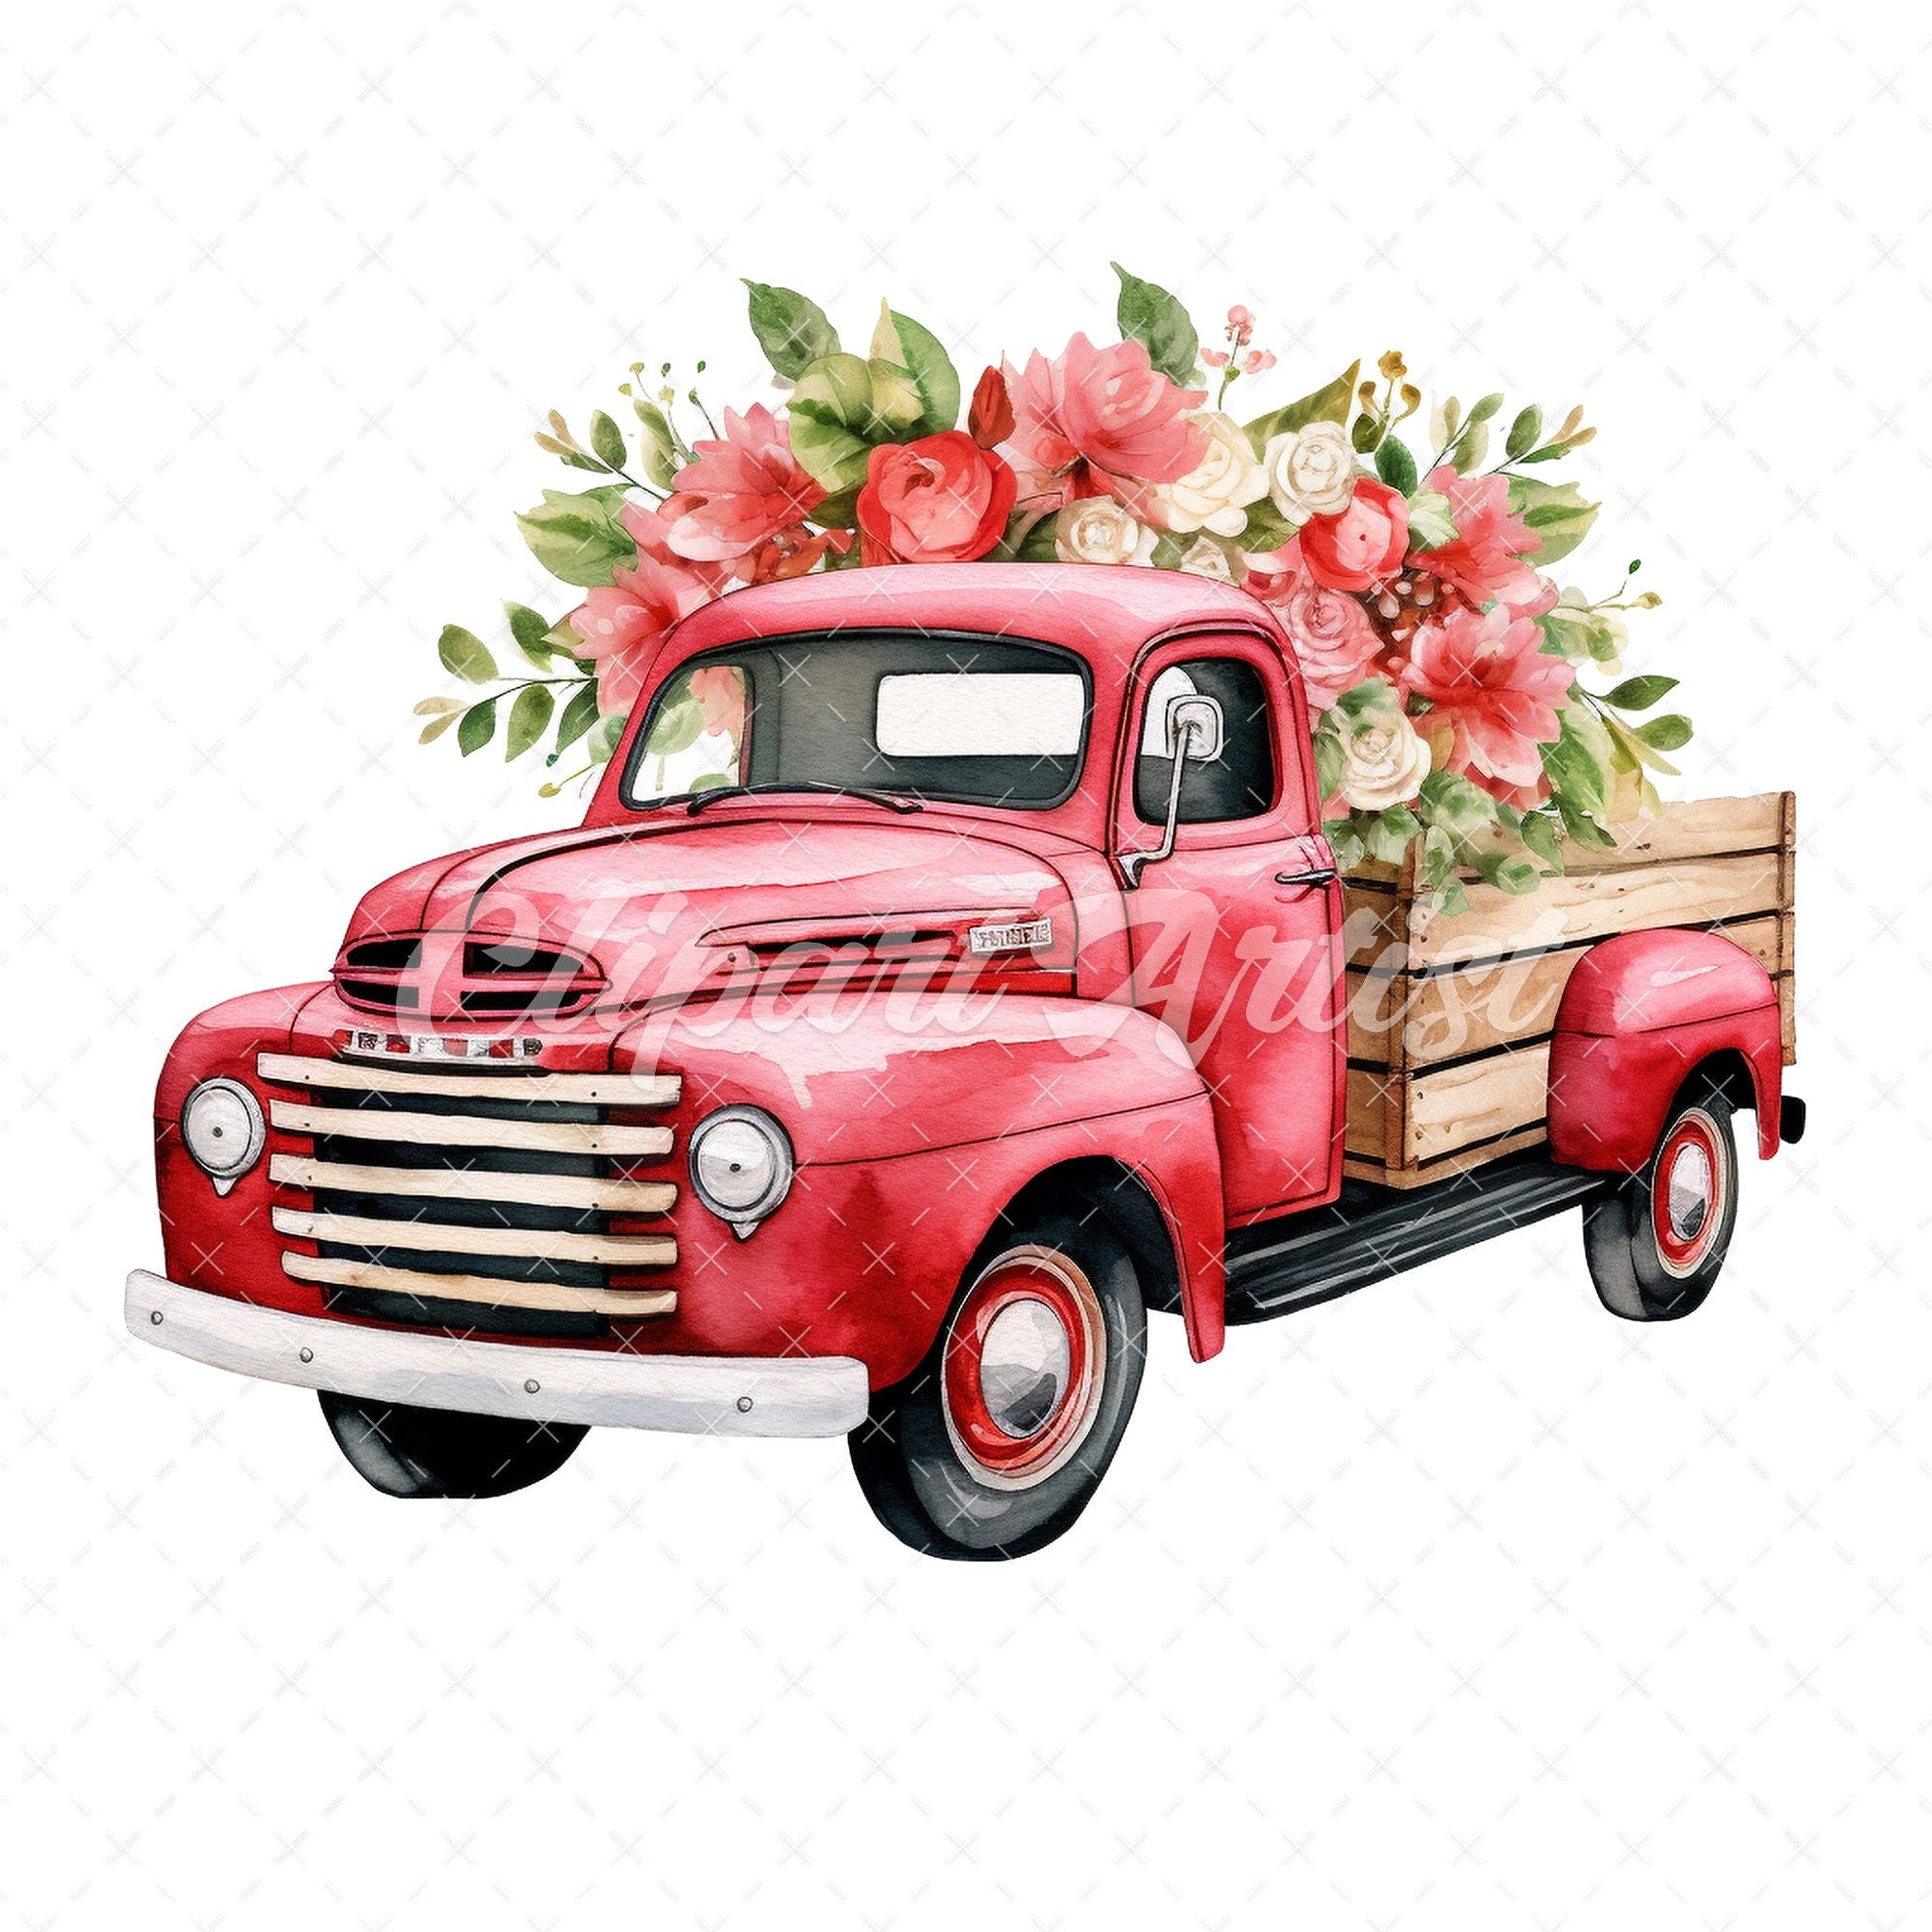 18 High-Quality Roses Pickup Trucks Clipart - Roses trucks digital watercolor JPG instant download for commercial use - Digital download